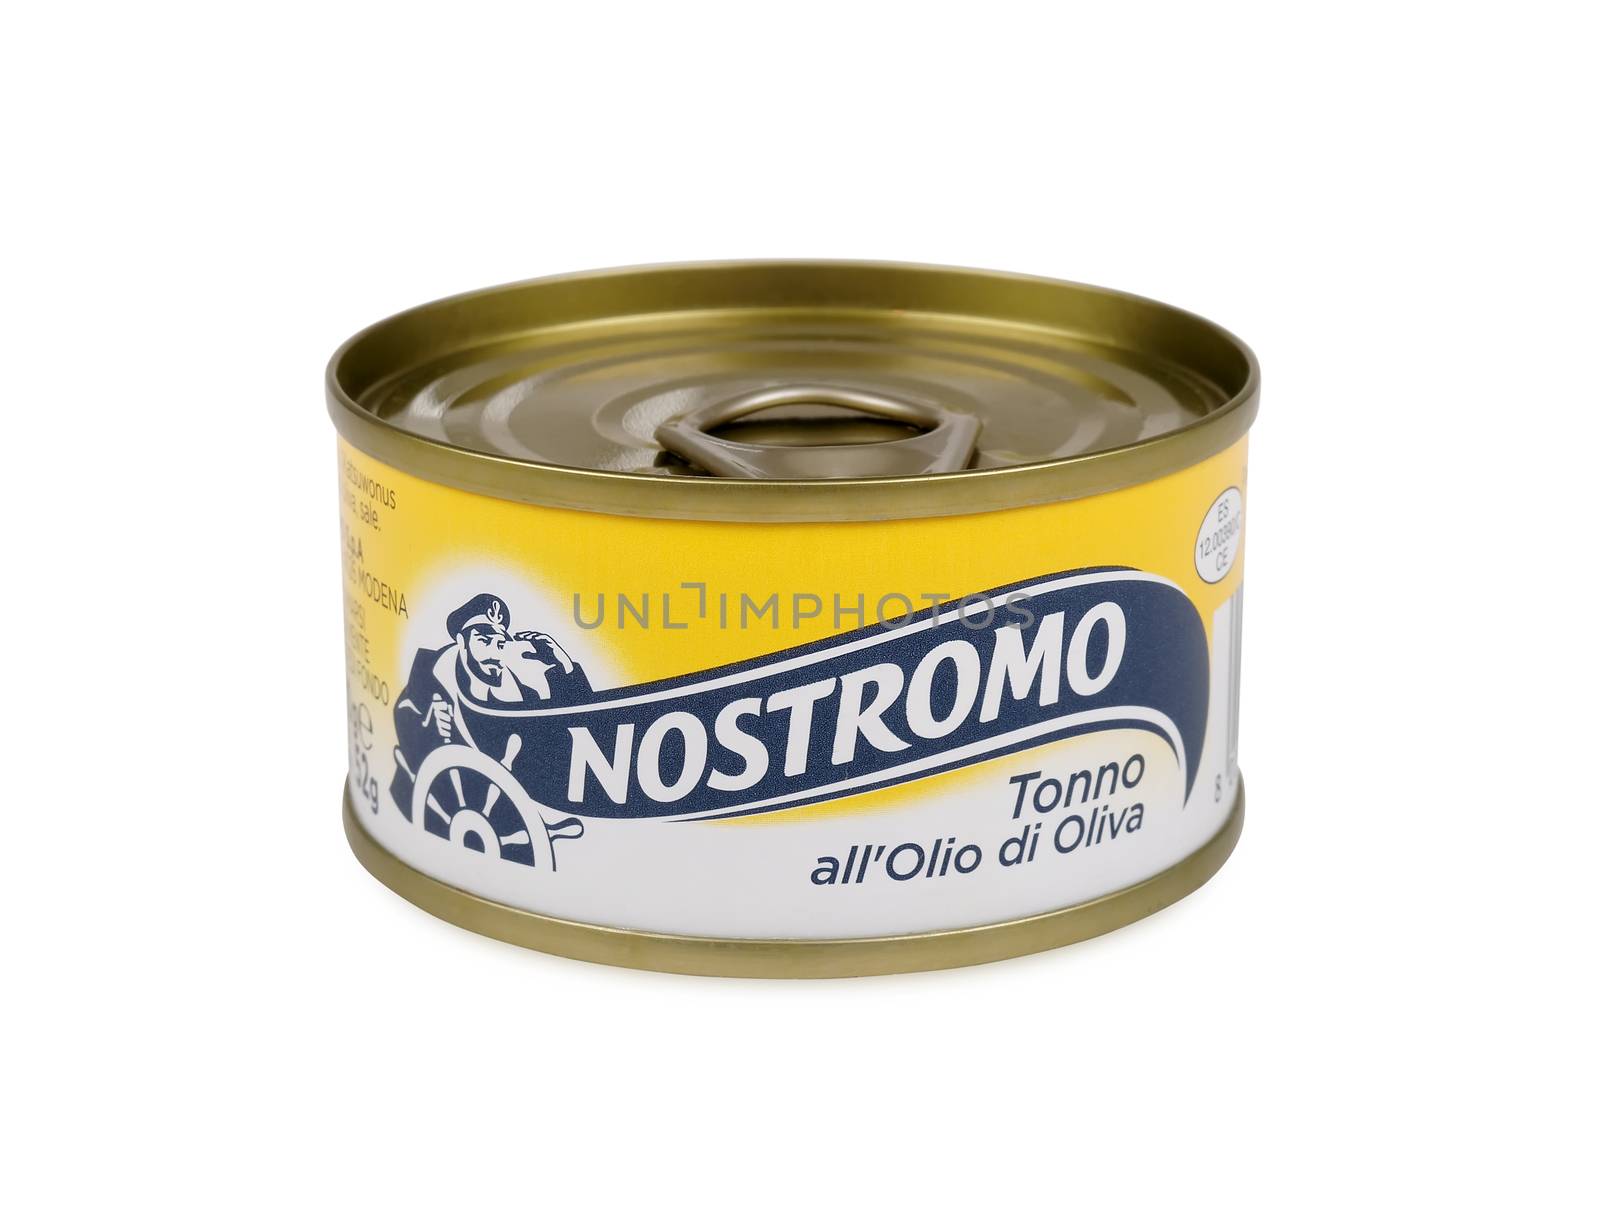 PULA, CROATIA - APRIL 17, 2016: Nostromo is one of the best known food brands in Italy. It was born as a company in 1941. Renamed in 1951, the Nostromo brand makes its products at its factory in Grado, in North-East Italy.      